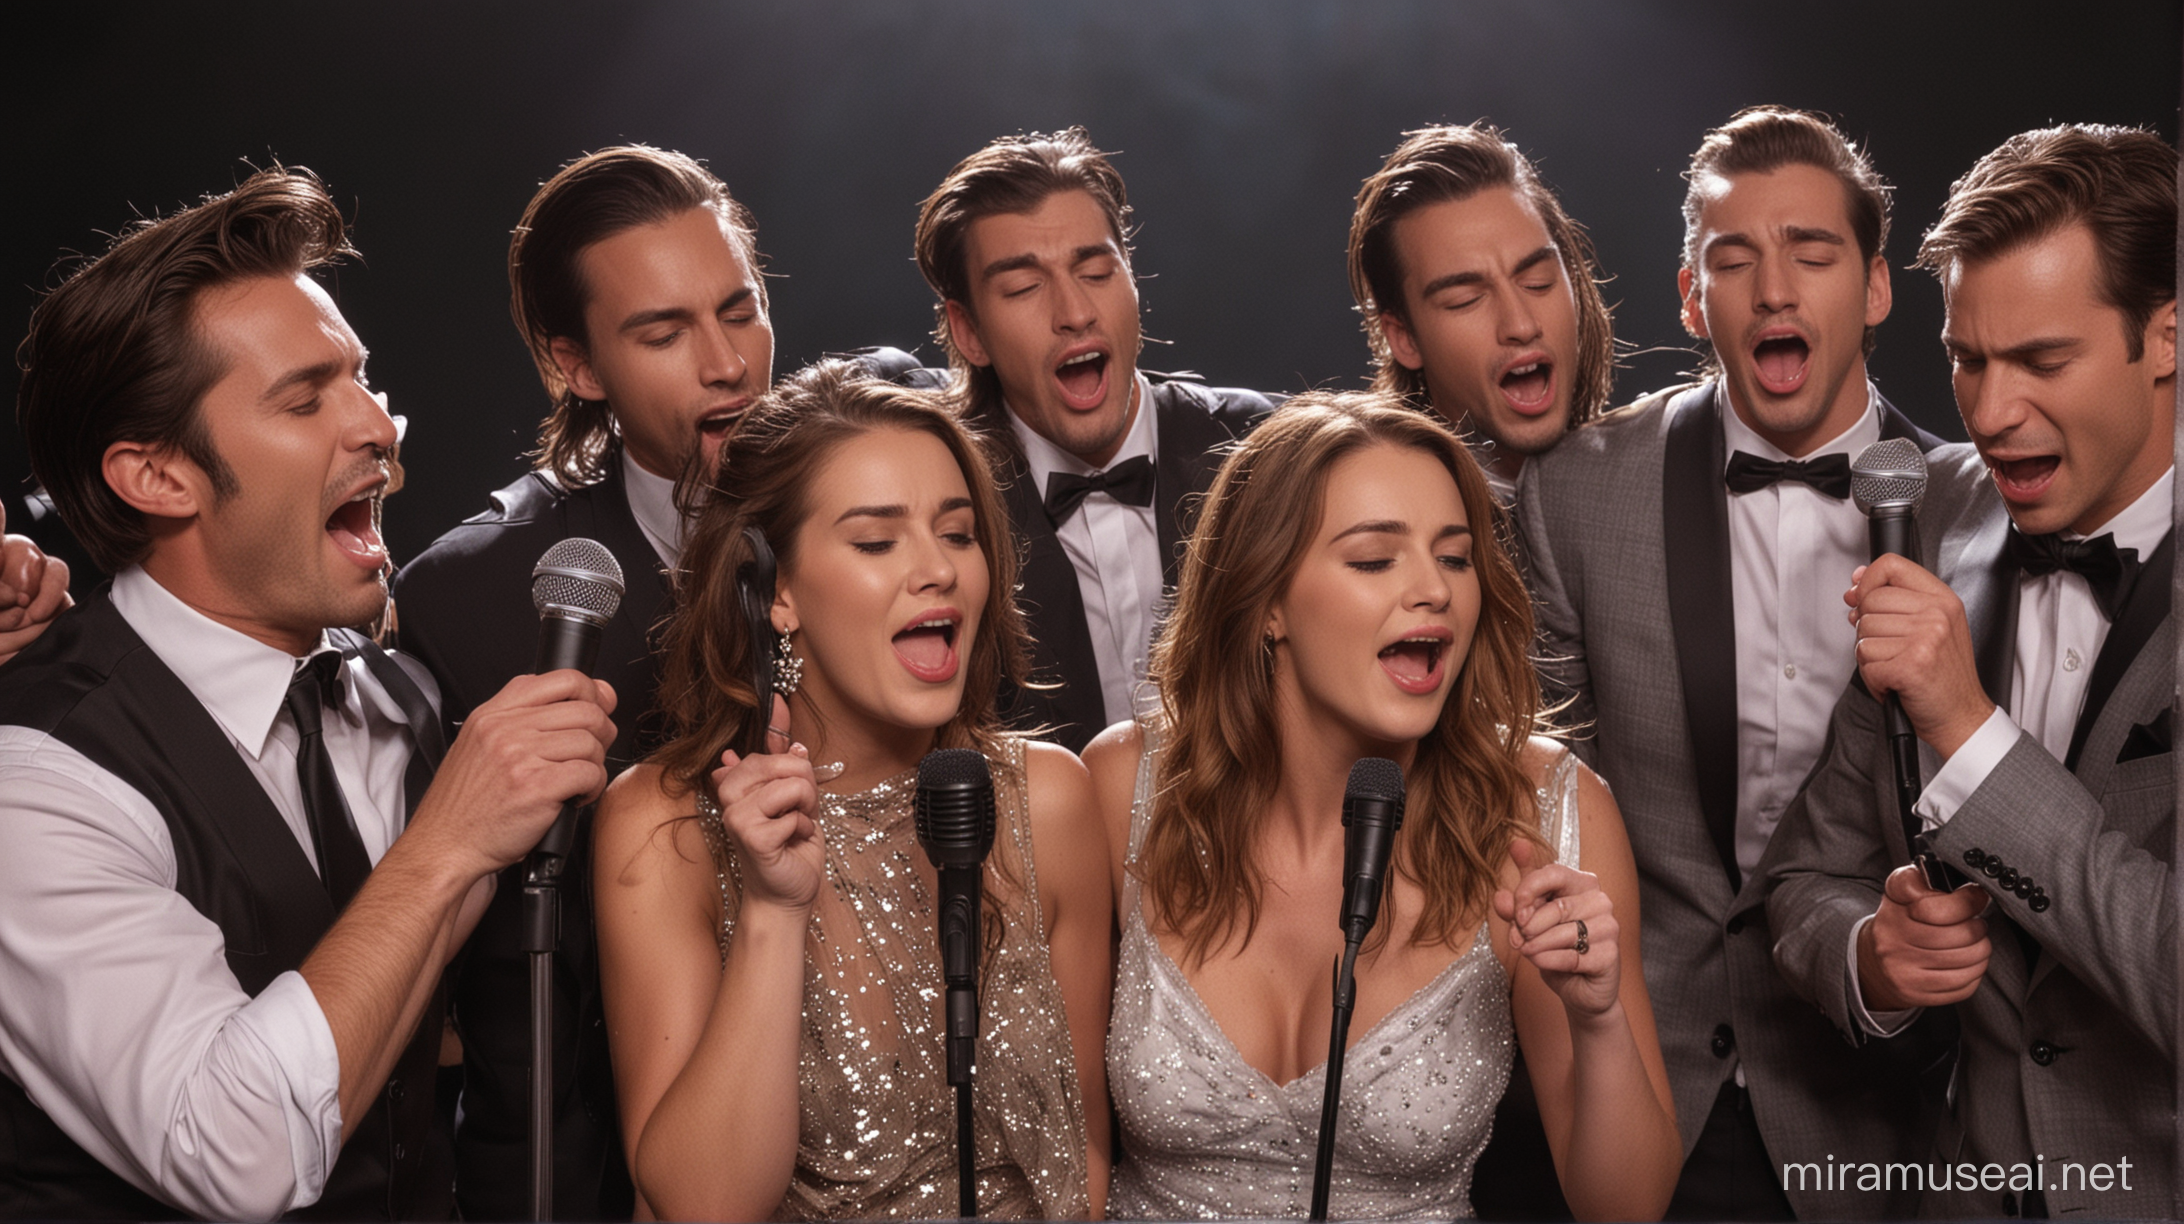 A group of men and women singing with a microphone
